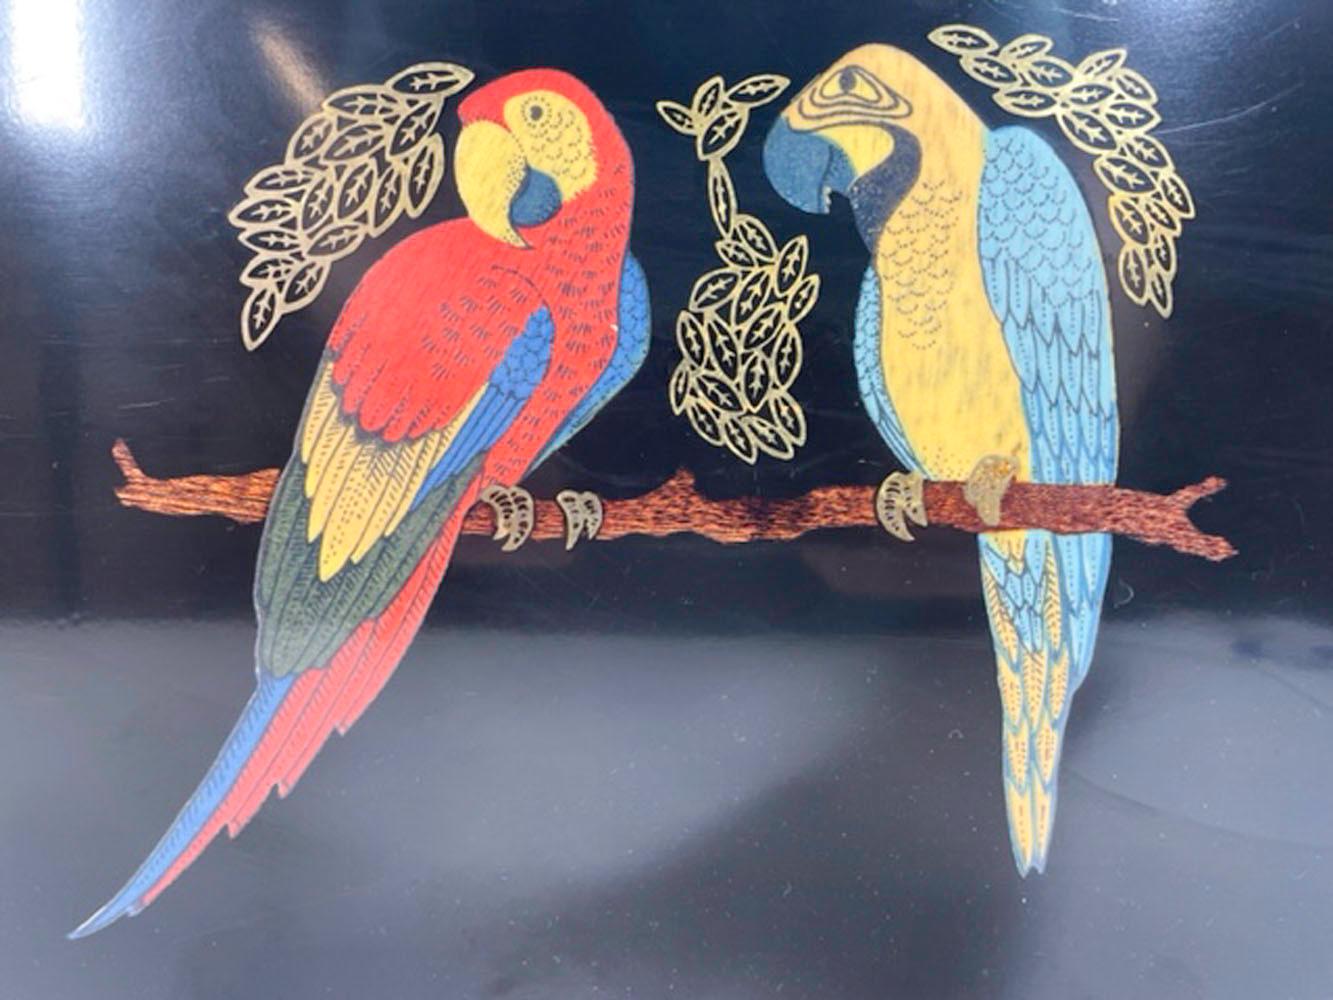 Vintage serving tray by Couroc of Monterey, made of phenolic resin inlaid with brass and stained wood depicting a pair of brightly colored macaws on a branch.
Phenolic resin is resistant to damage from alcohol and hot water, making it ideal for use